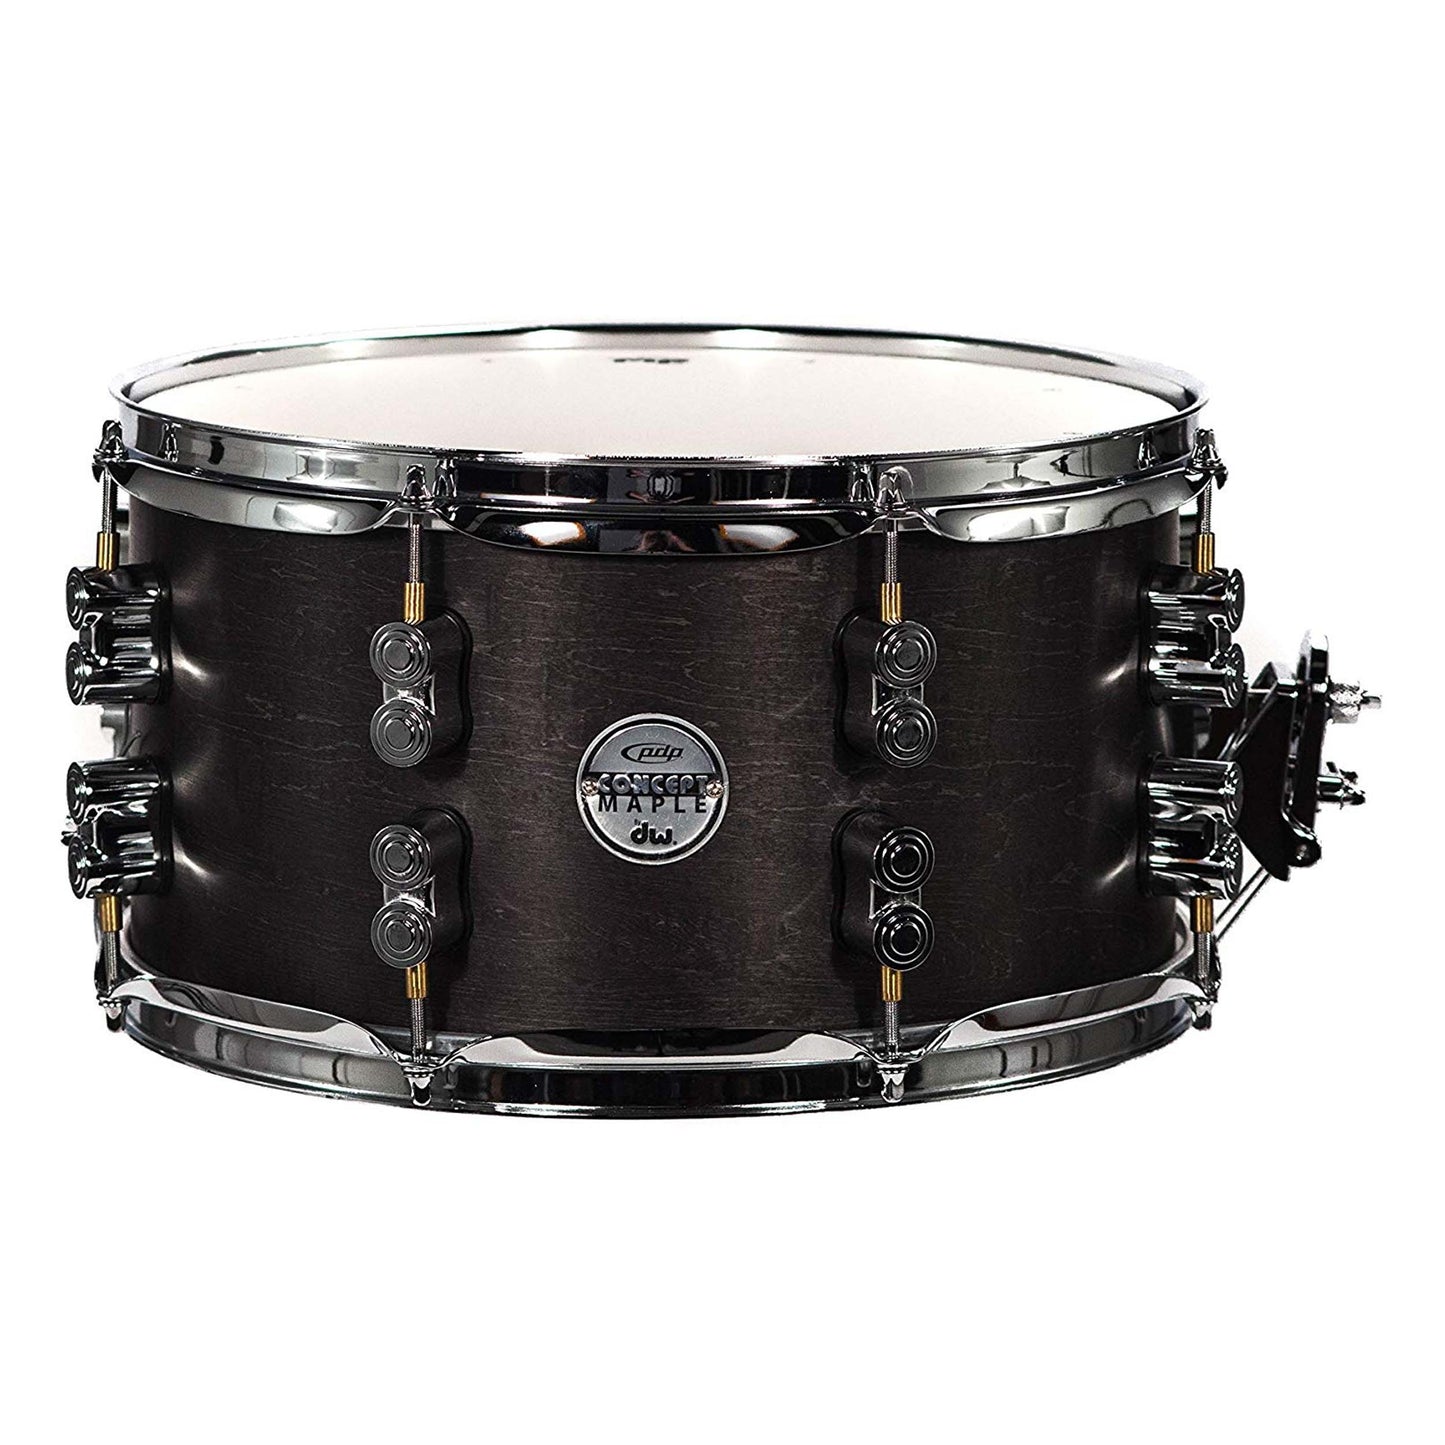 Pacific Drums & Percussion By DW Black Wax Maple Snare Drum 7x13